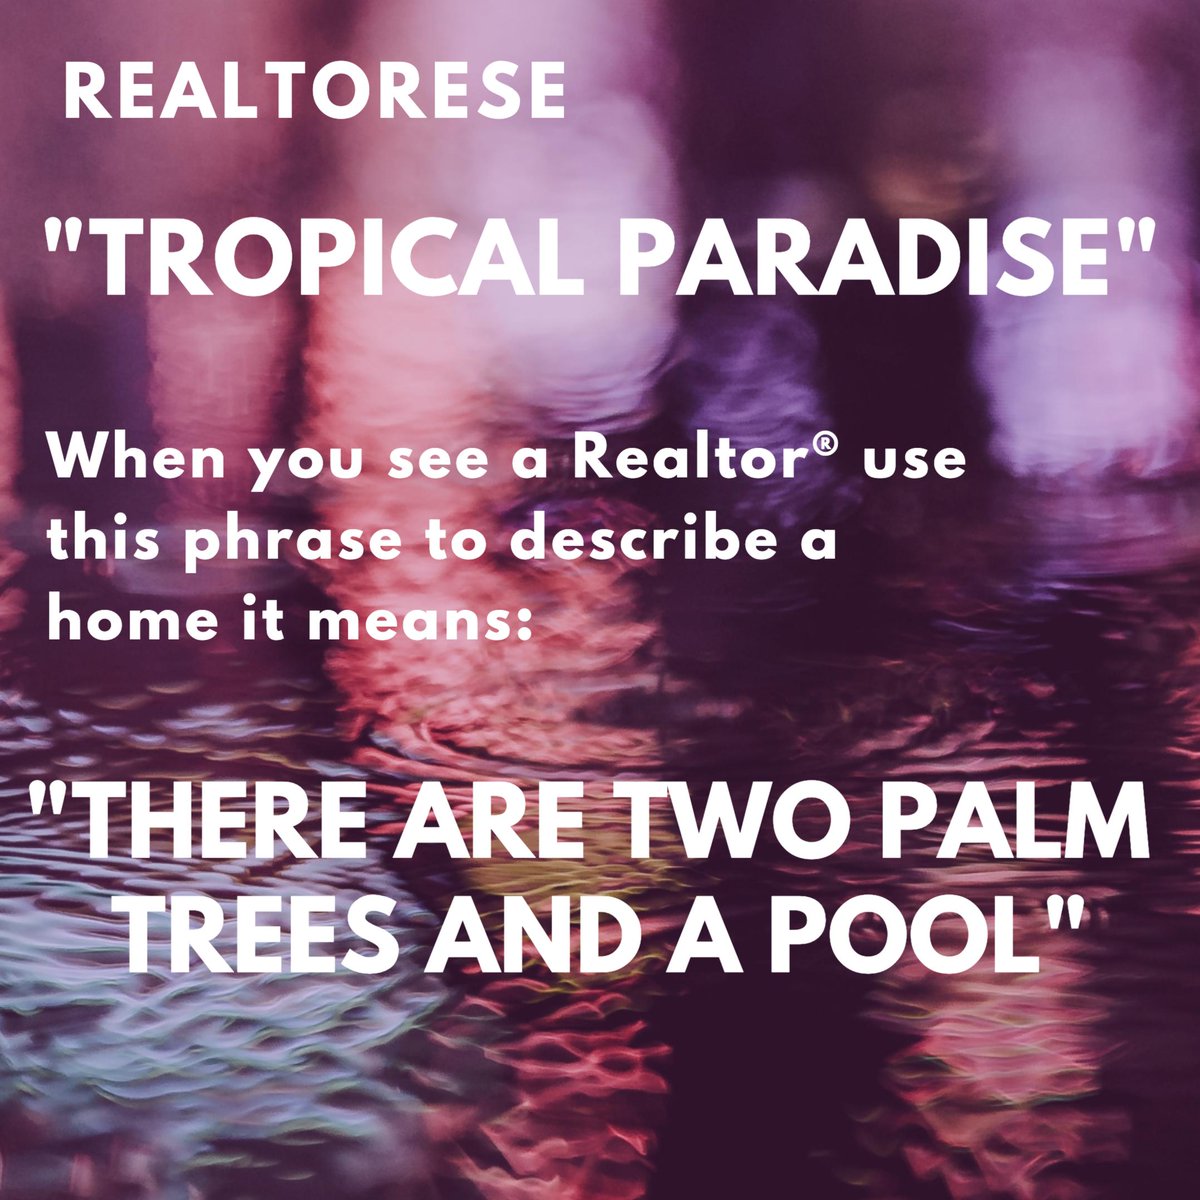 Watch out for that Reatorese! This silly series is to help you understand what some common phrases Realtors® like to use to describe homes. #realtorese #abetterqualityexperience #dowork #jeremypoehlsrealtor #thejasonwitteteam #scottsdalerealestate #chandlerrealestate